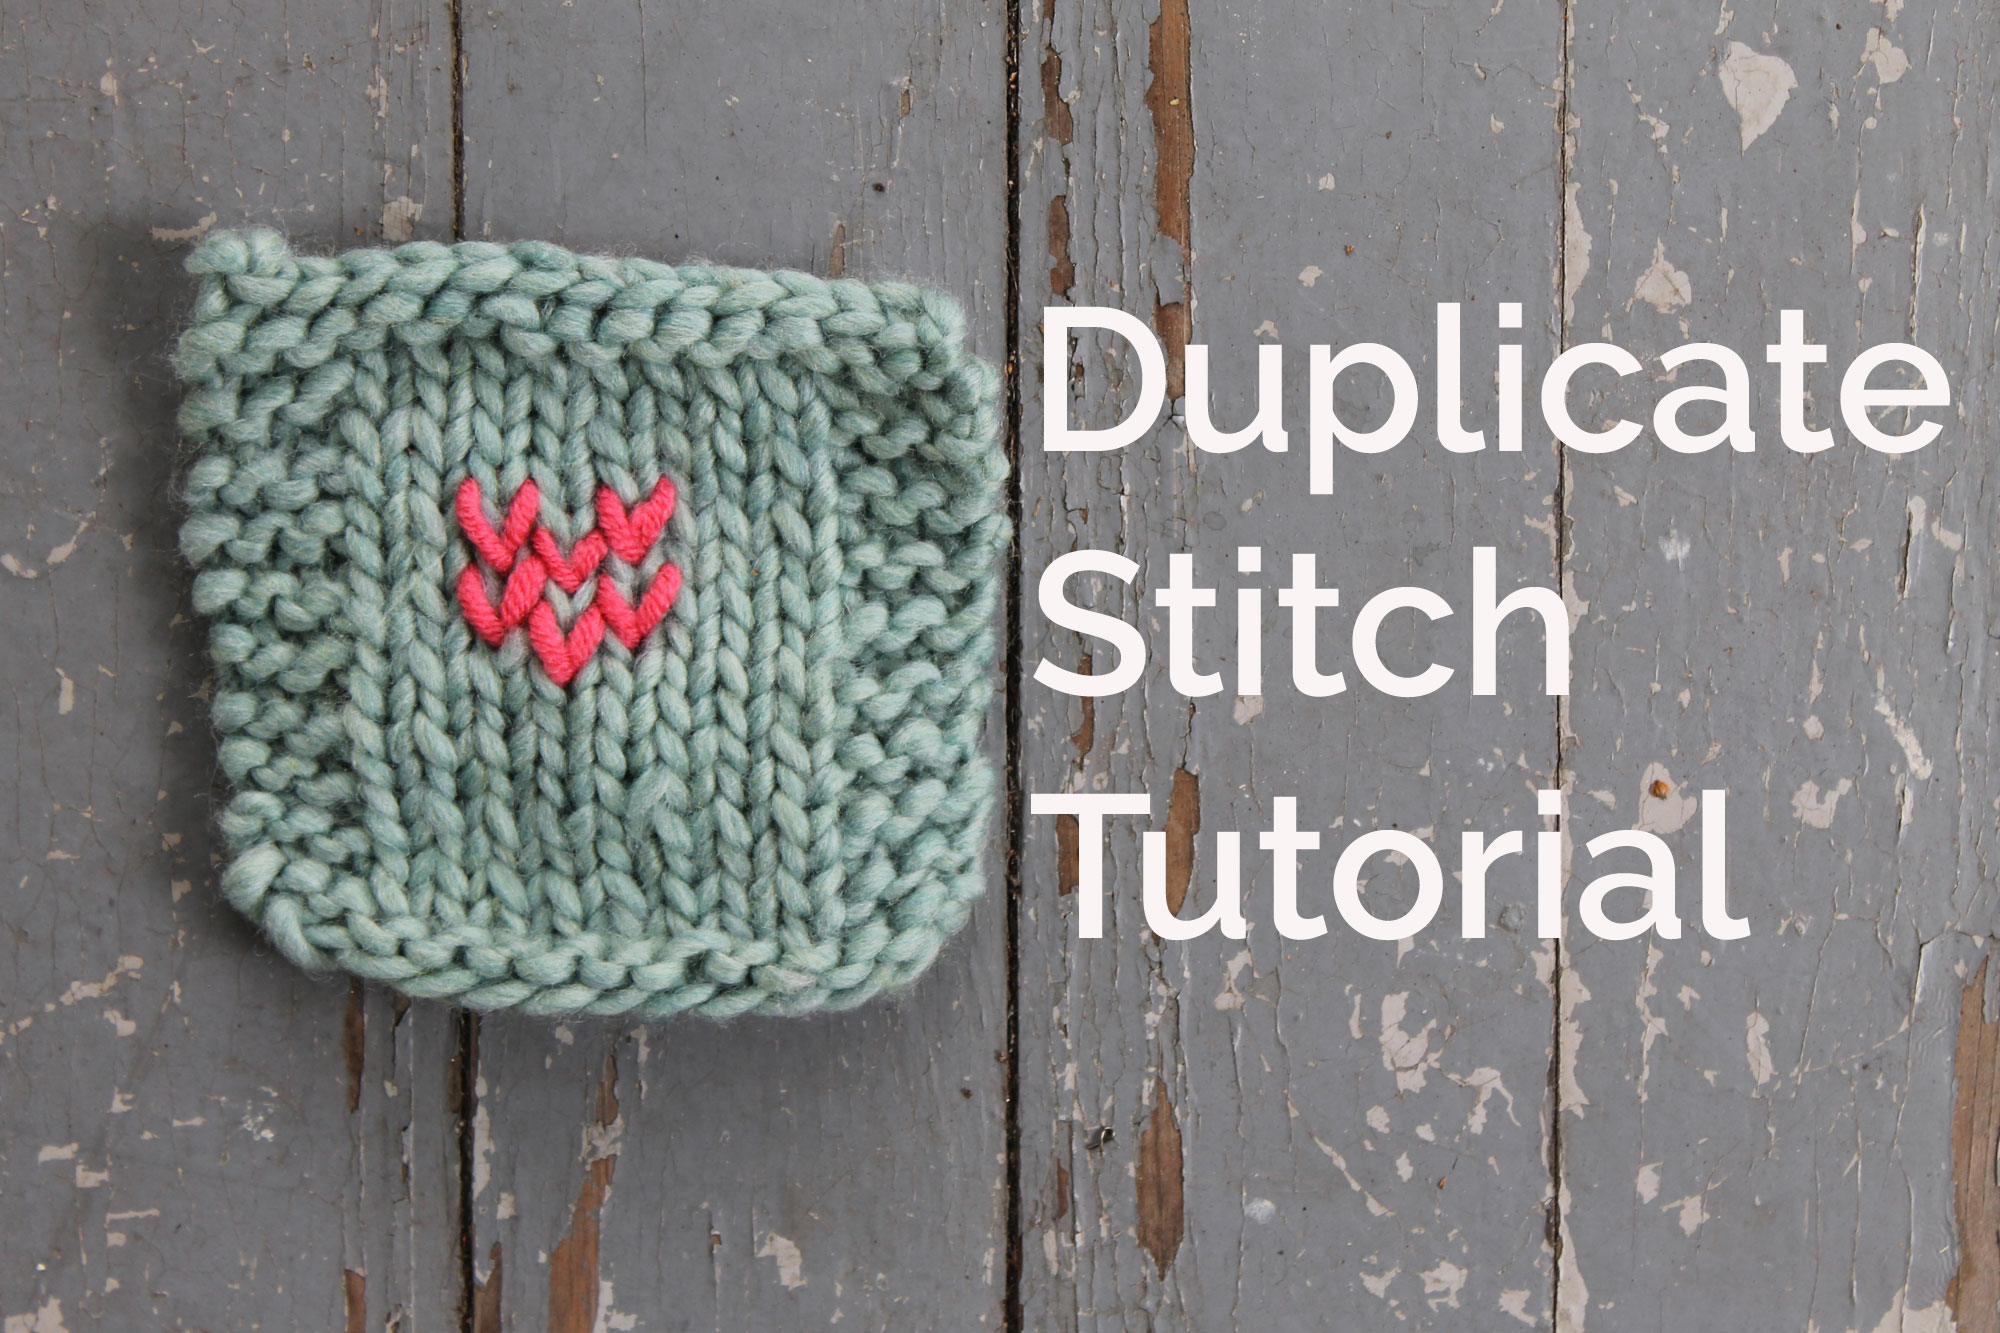 How to Knit the Duplicate Stitch